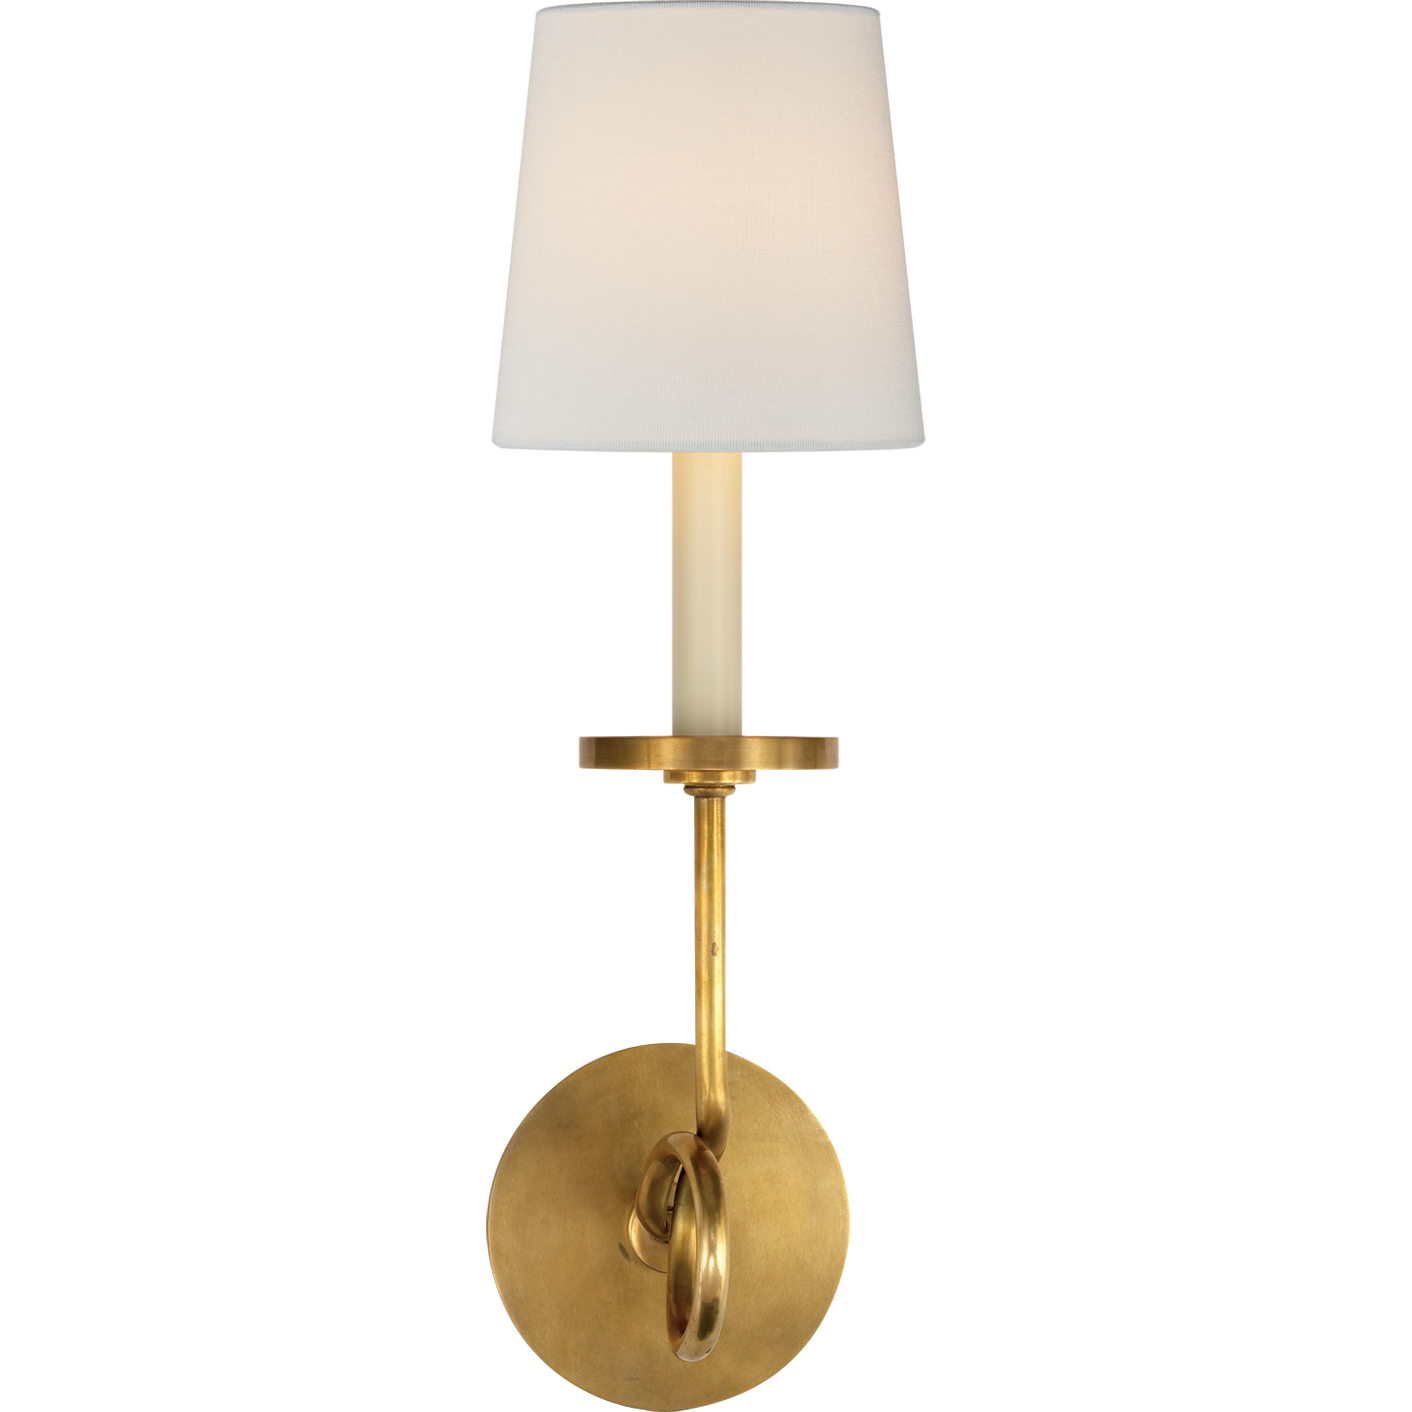 Symmetric Twist Single Sconce with Linen Shade